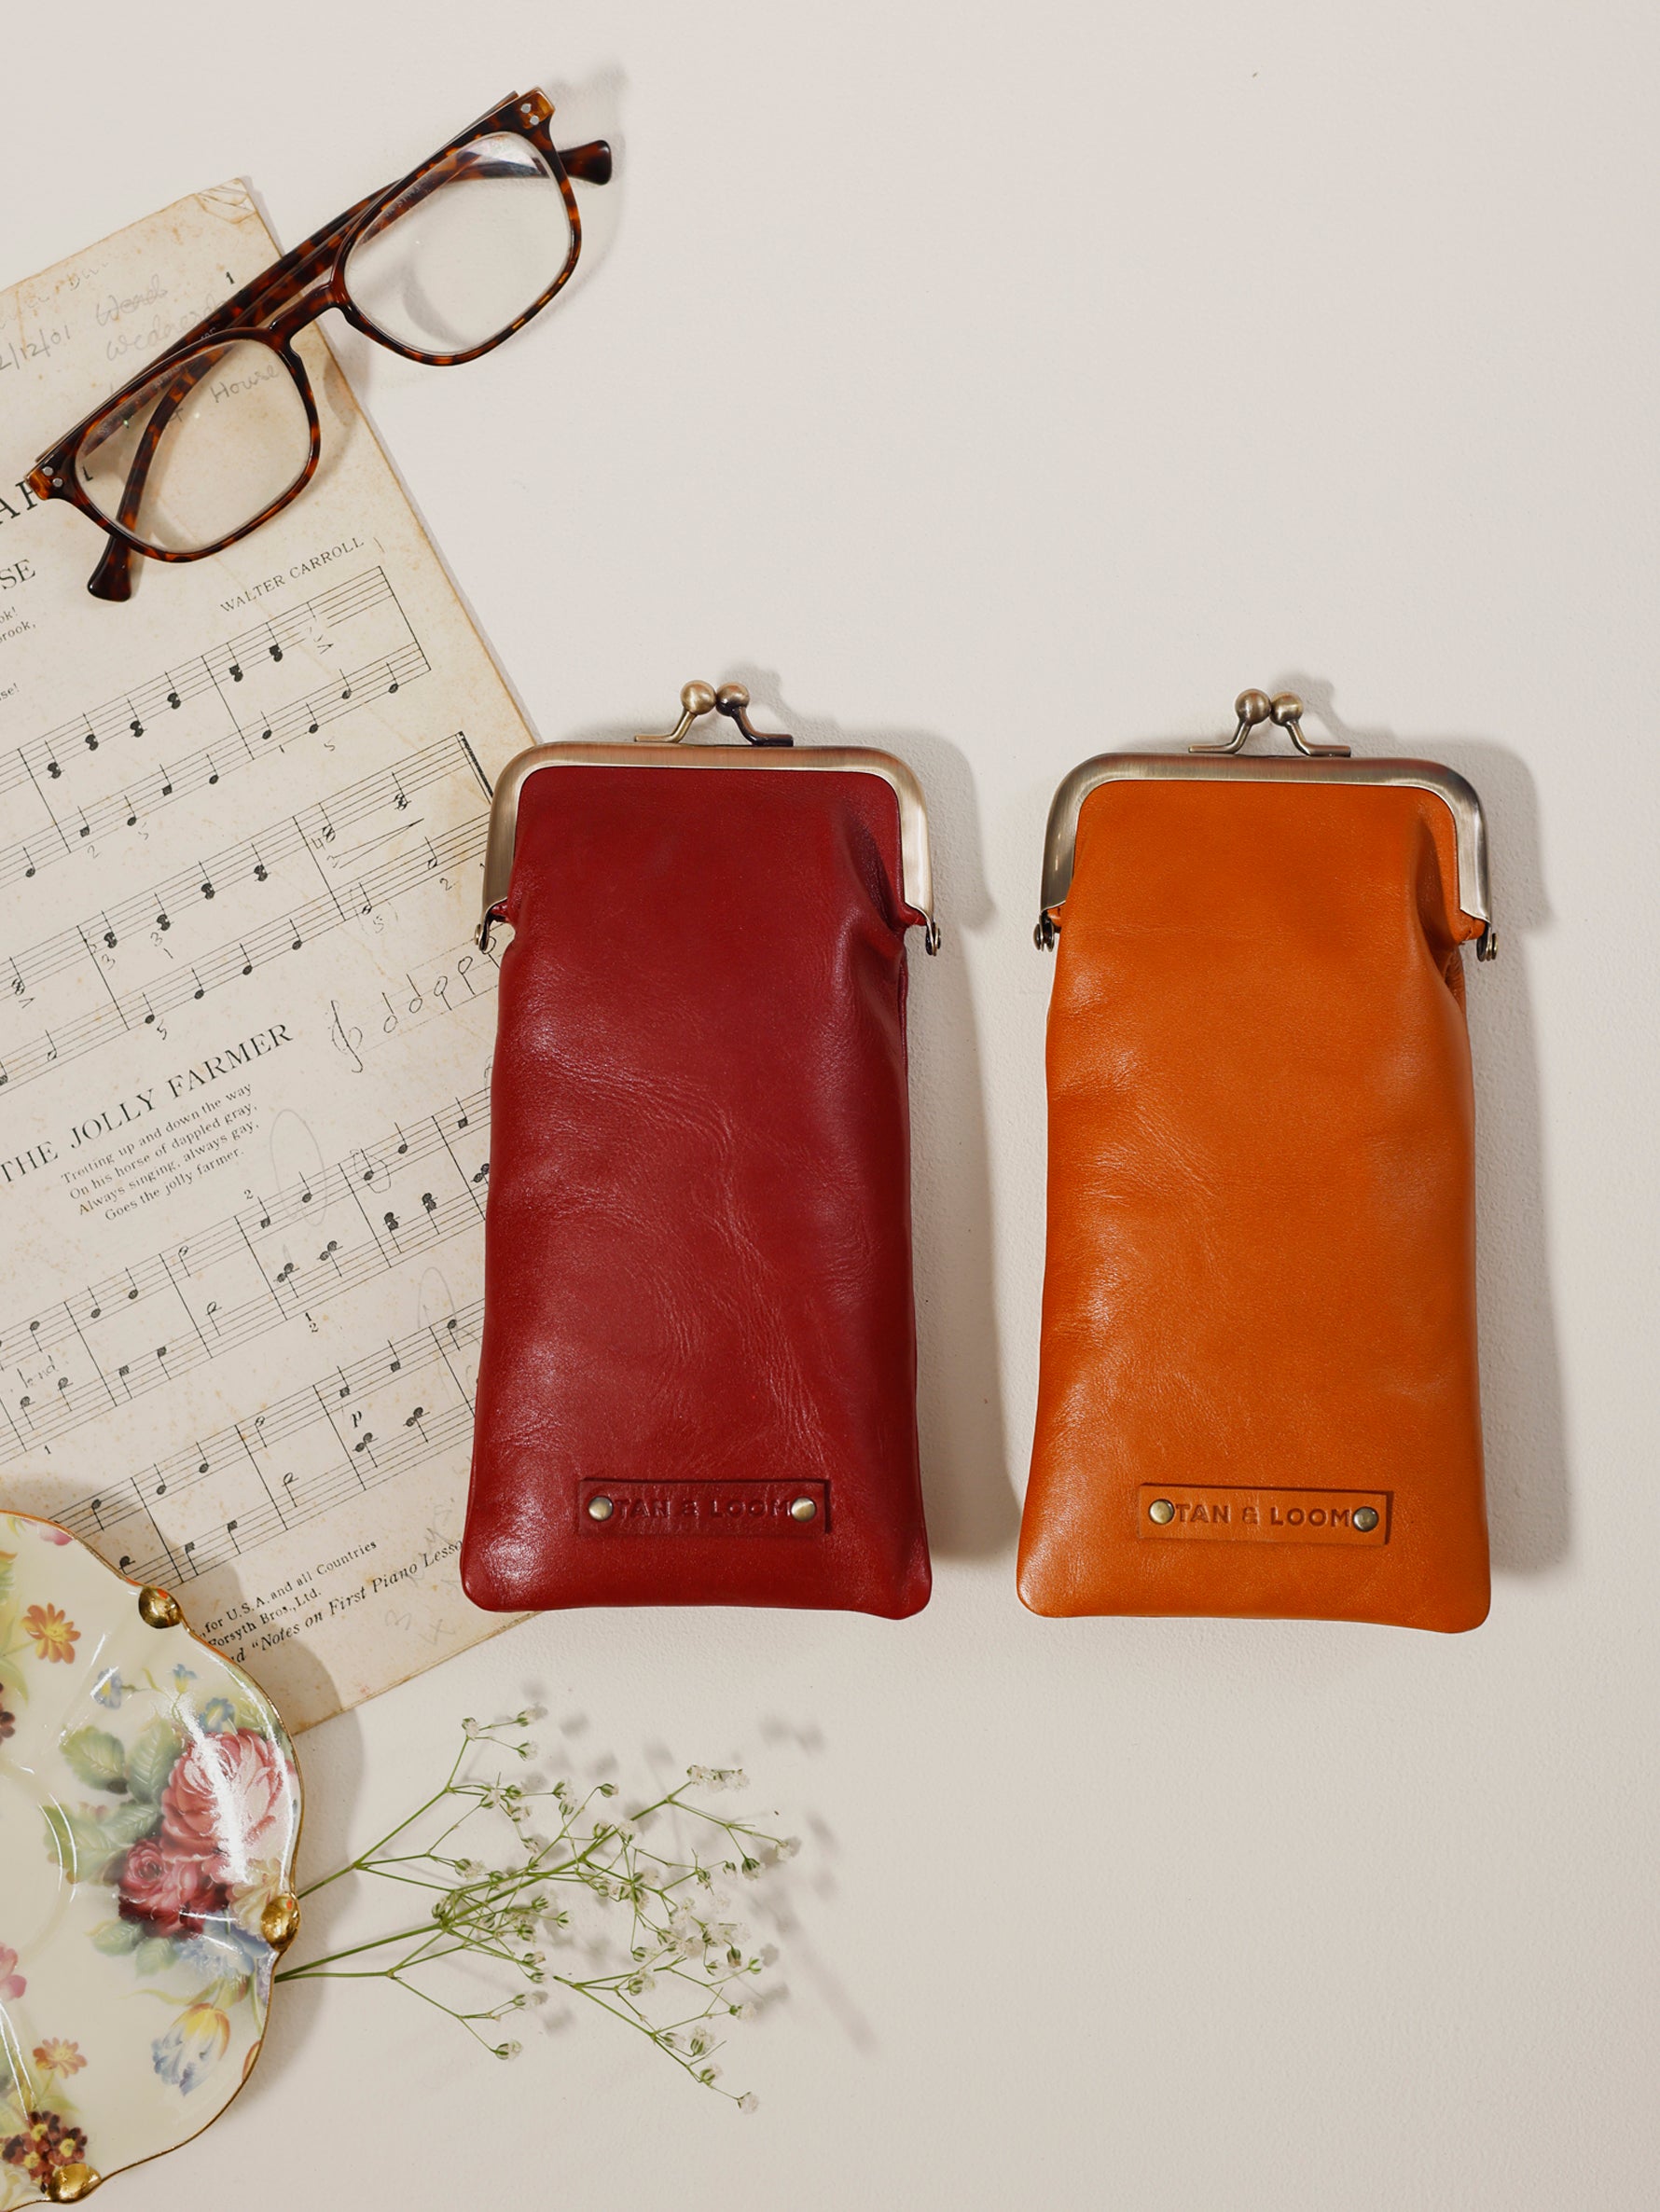 Handcrafted Genuine Vegetable Tanned Leather Reader's Case Natural Tan for Women Tan & Loom